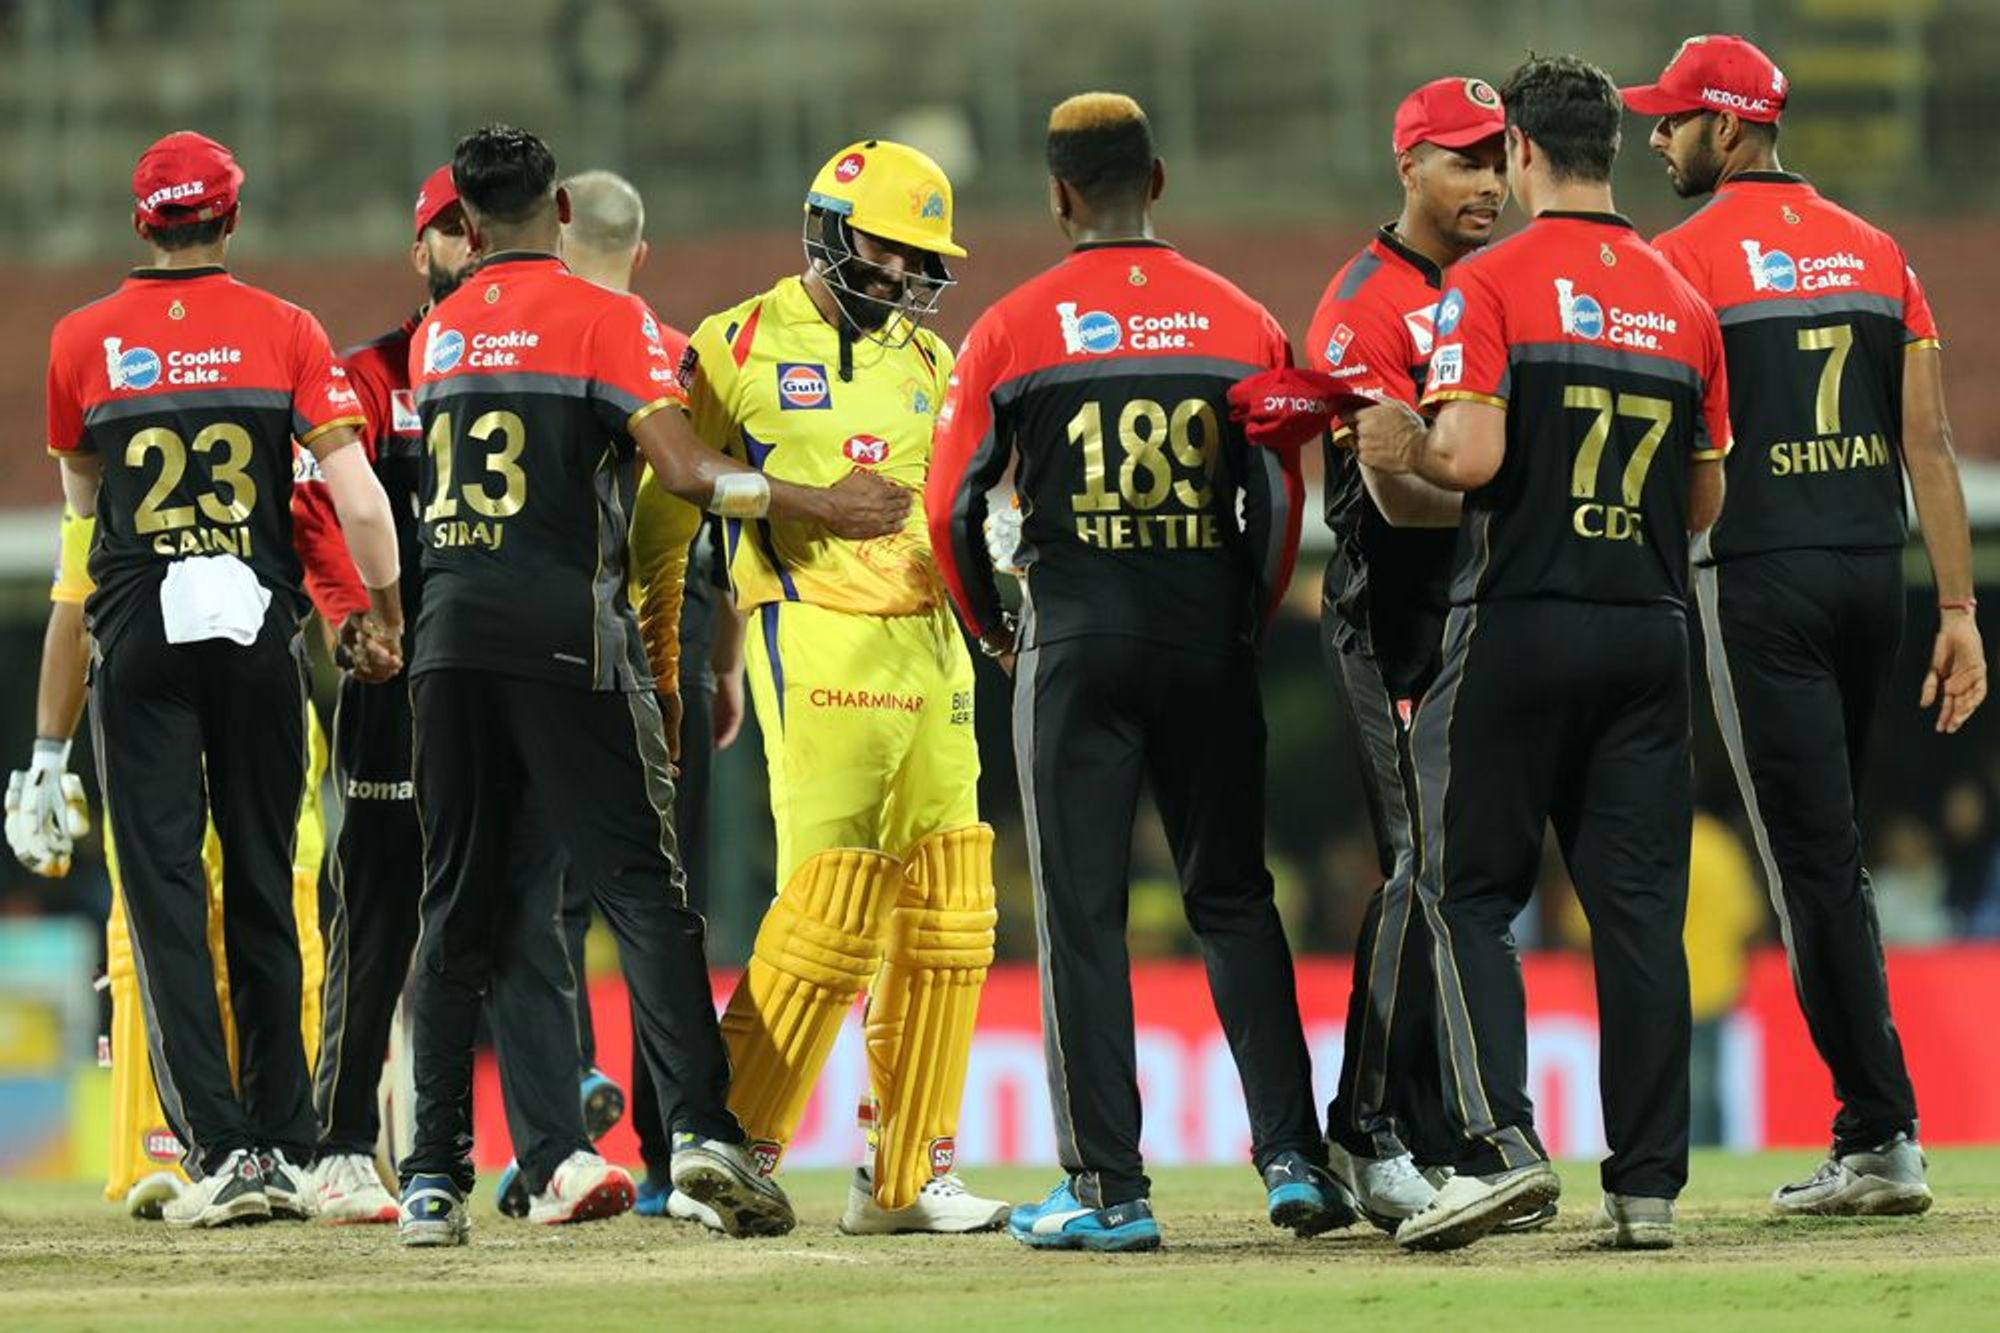 IPL 2019 | Vikram Solanki terms Chennai pitch “not an ideal” one after RCB’s defeat